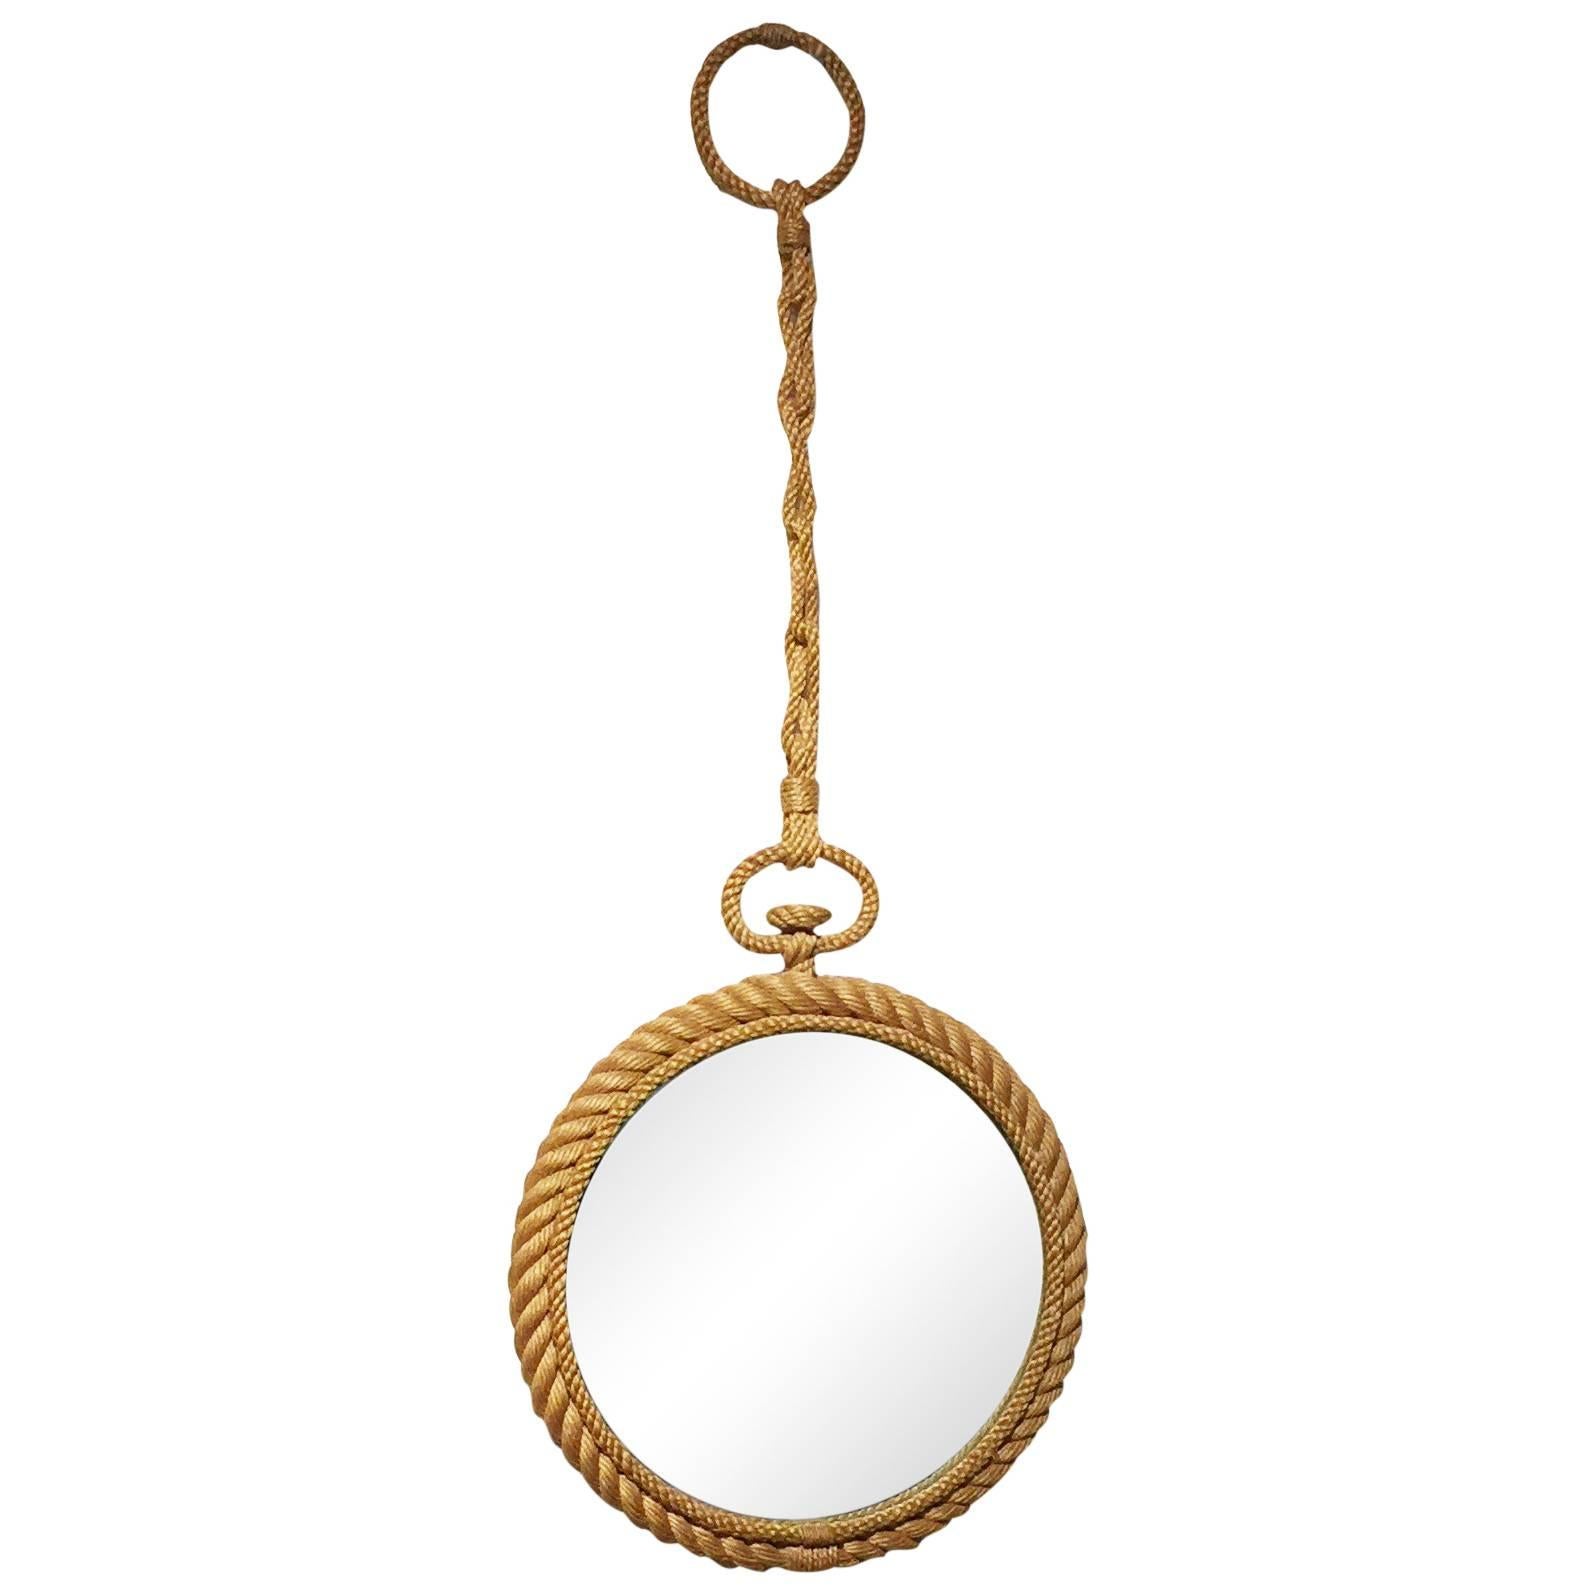 Rope Mirror in the Shape of Pocket Watch by Audoux Minet, France, 1960s